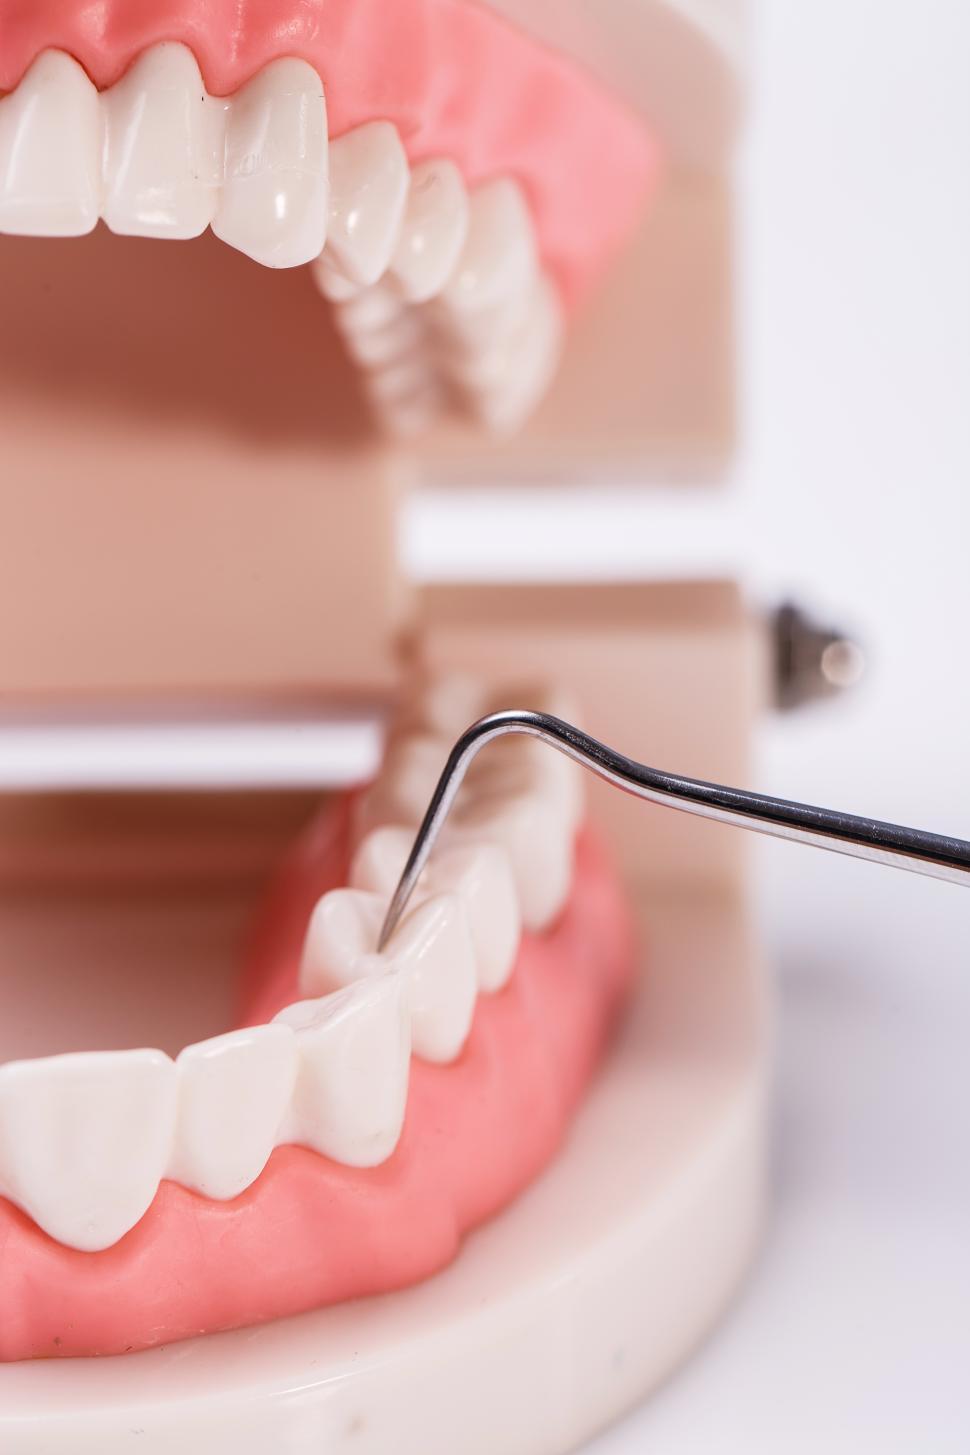 Free Image of White teeth modeled with dental pick 